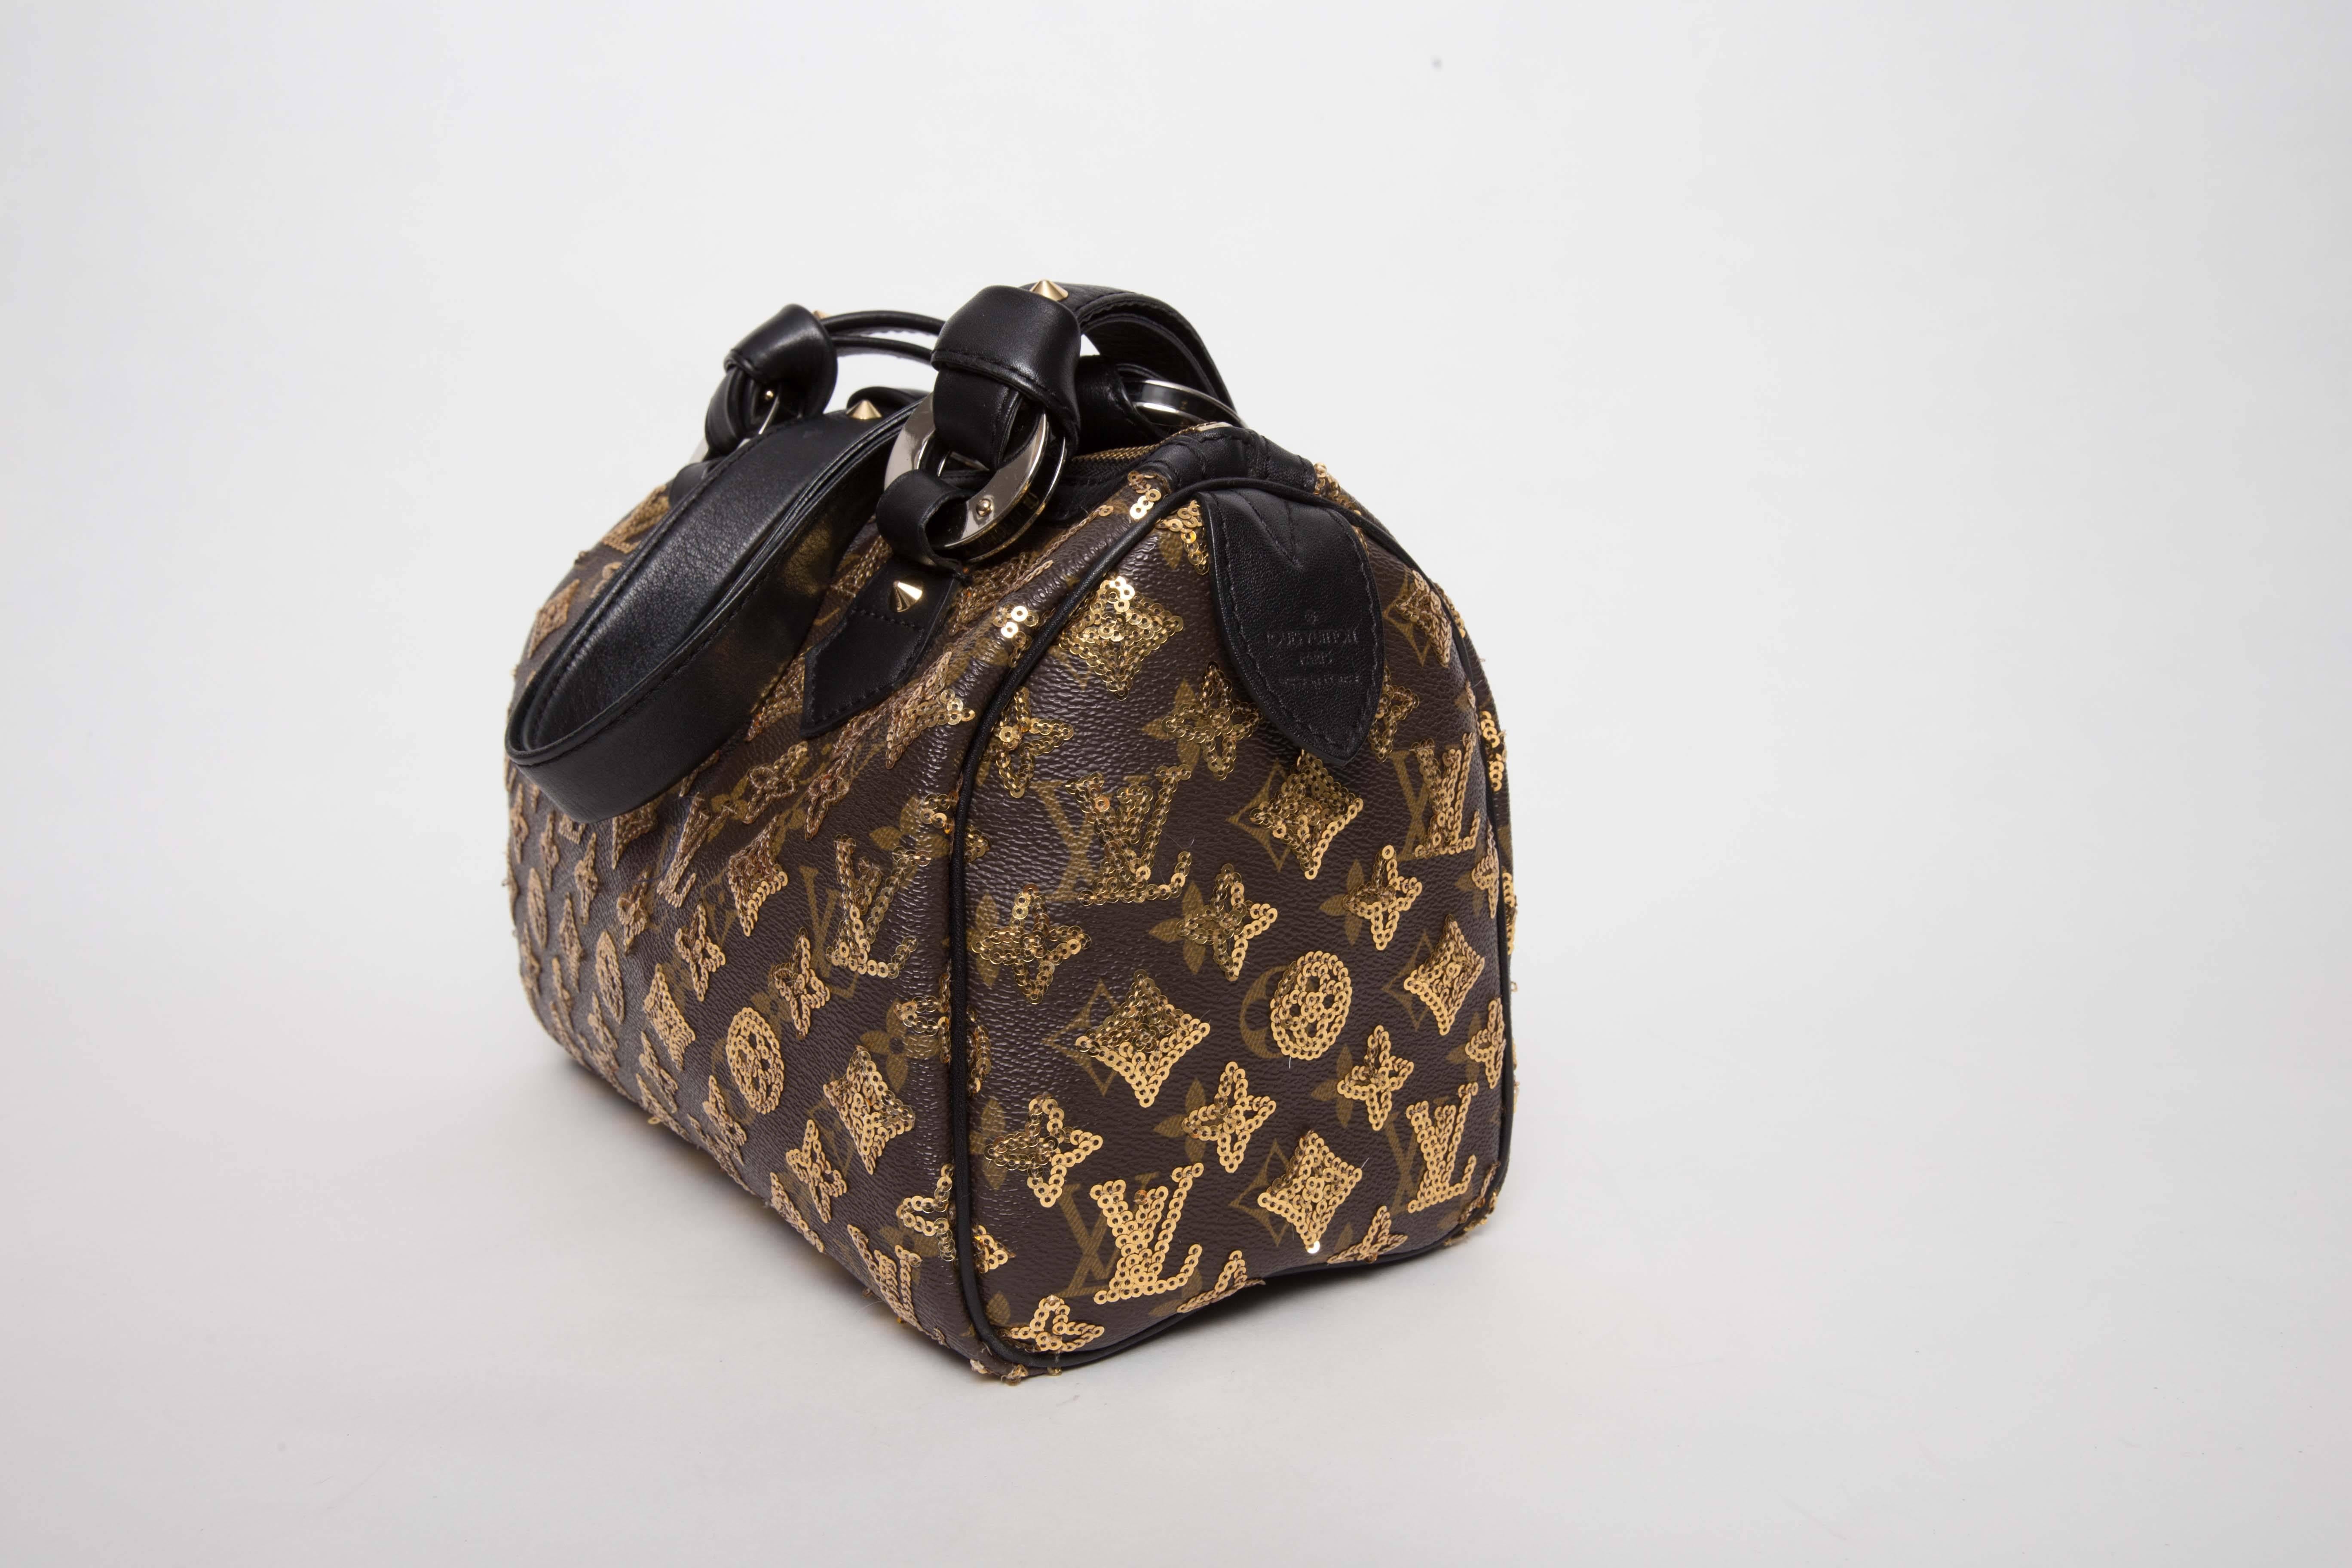 Louis Vuitton Monogram Eclipse Speedy 28 features the traditional monogram toile canvas, with sewn gold sequins. The bag has strap leather handles with large brass handle loops. There is a pad of leather for the base and base feet. The interior is a